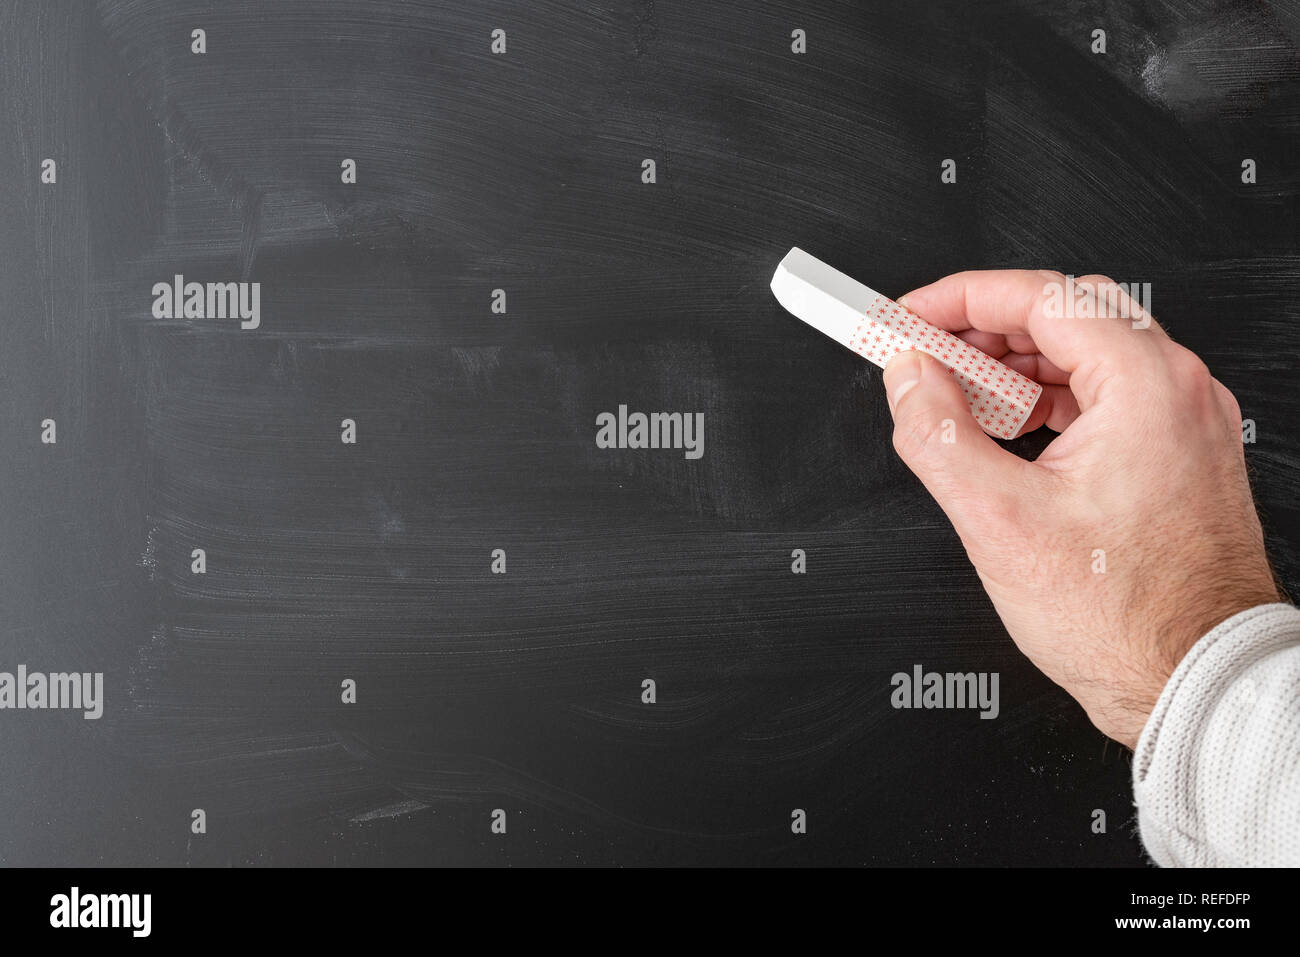 hand holding stick of chalk against chalkboard  Stock Photo